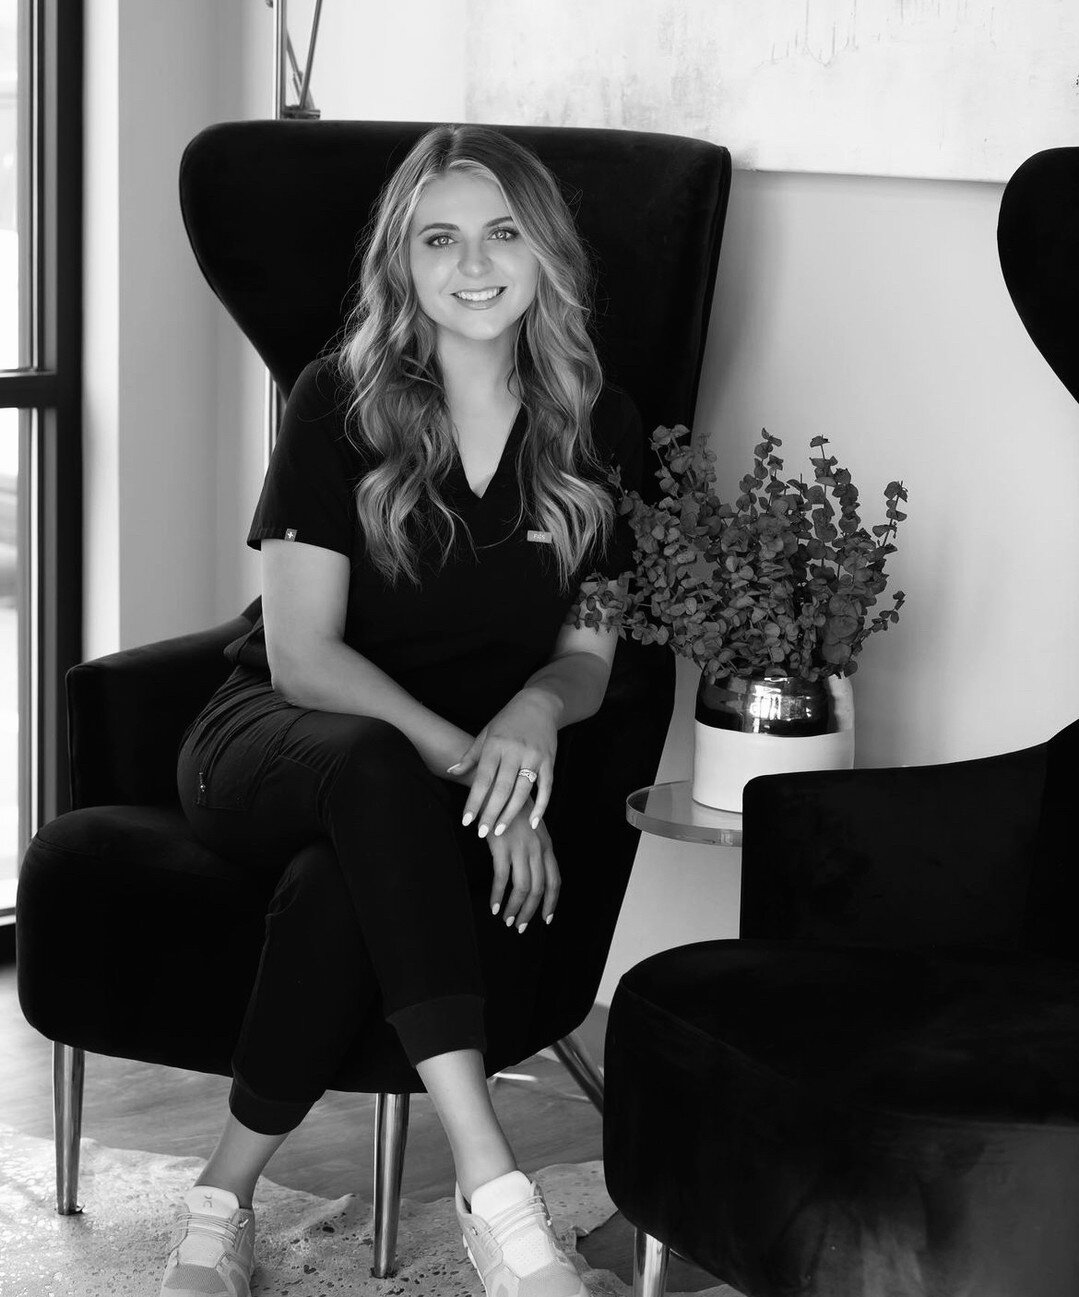 Introducing Taylor Bedwell of @thegallatinaesthetician 🙌🏻⁠
⁠
&quot;My name is Taylor and I am a medical aesthetician with Wellskin Aesthetics. I specialize in a vast array of aesthetic treatments, including medical grade facials, chemical peels, mi